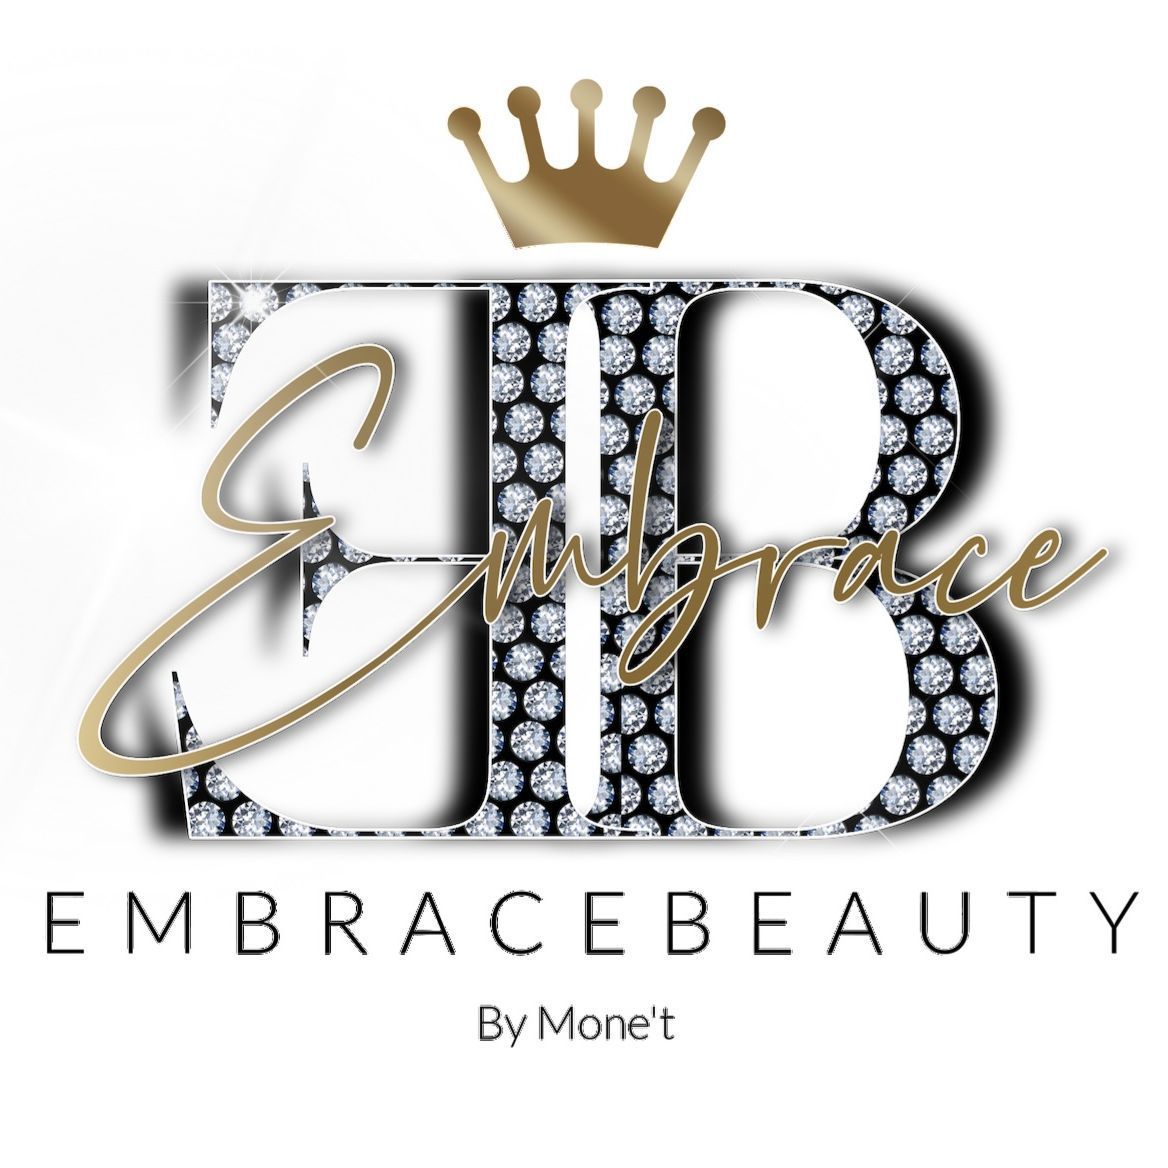 Embrace Beauty Bar LLC, 68345 east palm canyon dr, Cathedral City, 92234